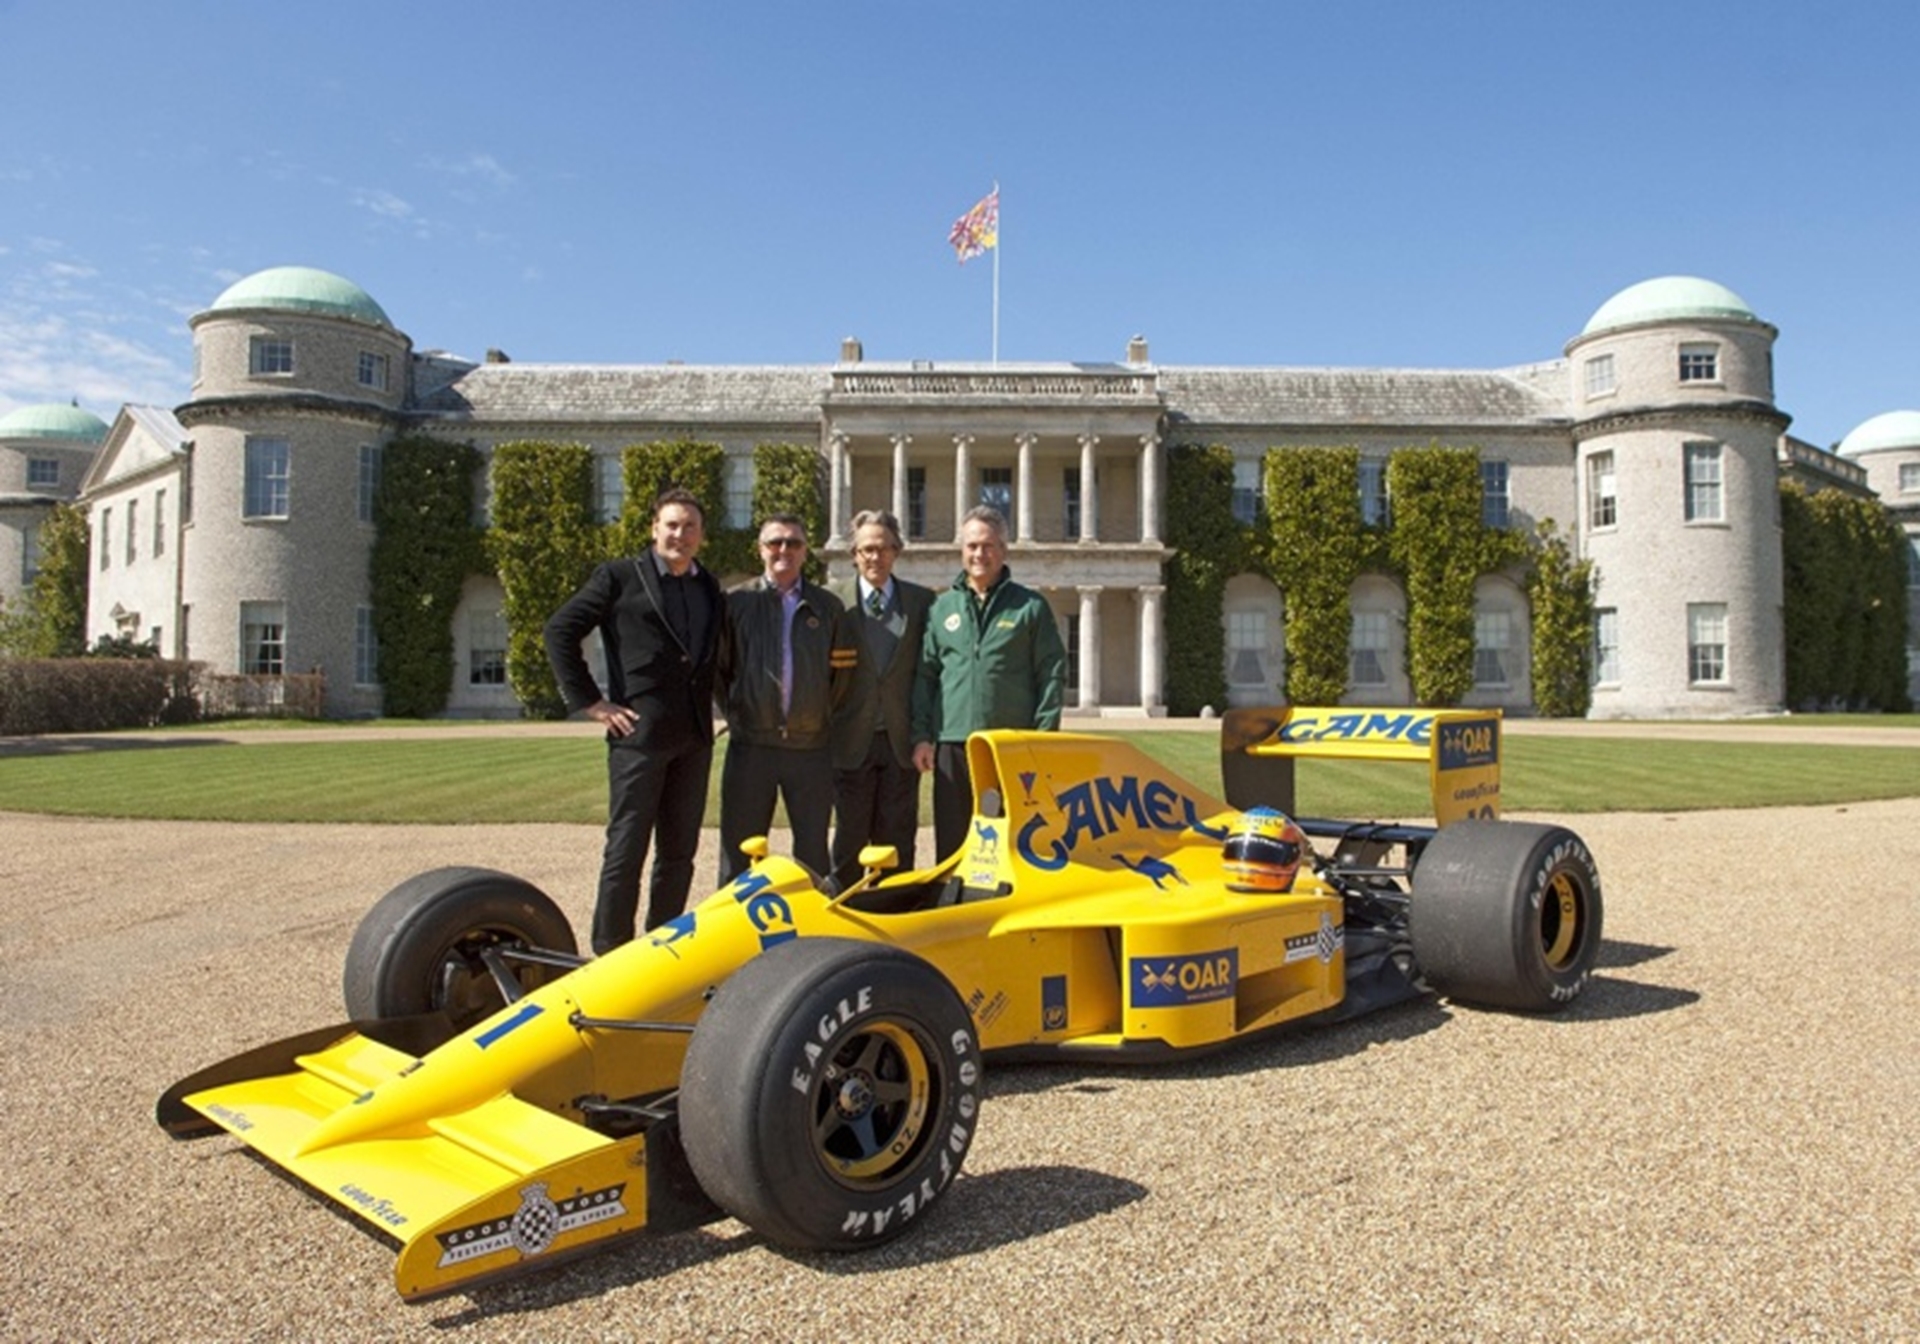 TEAM LOTUS TYPE 102 OWNER AND DRIVER TO MAKE WAVES AT THE 2012 GOODWOOD FESTIVAL OF SPEED